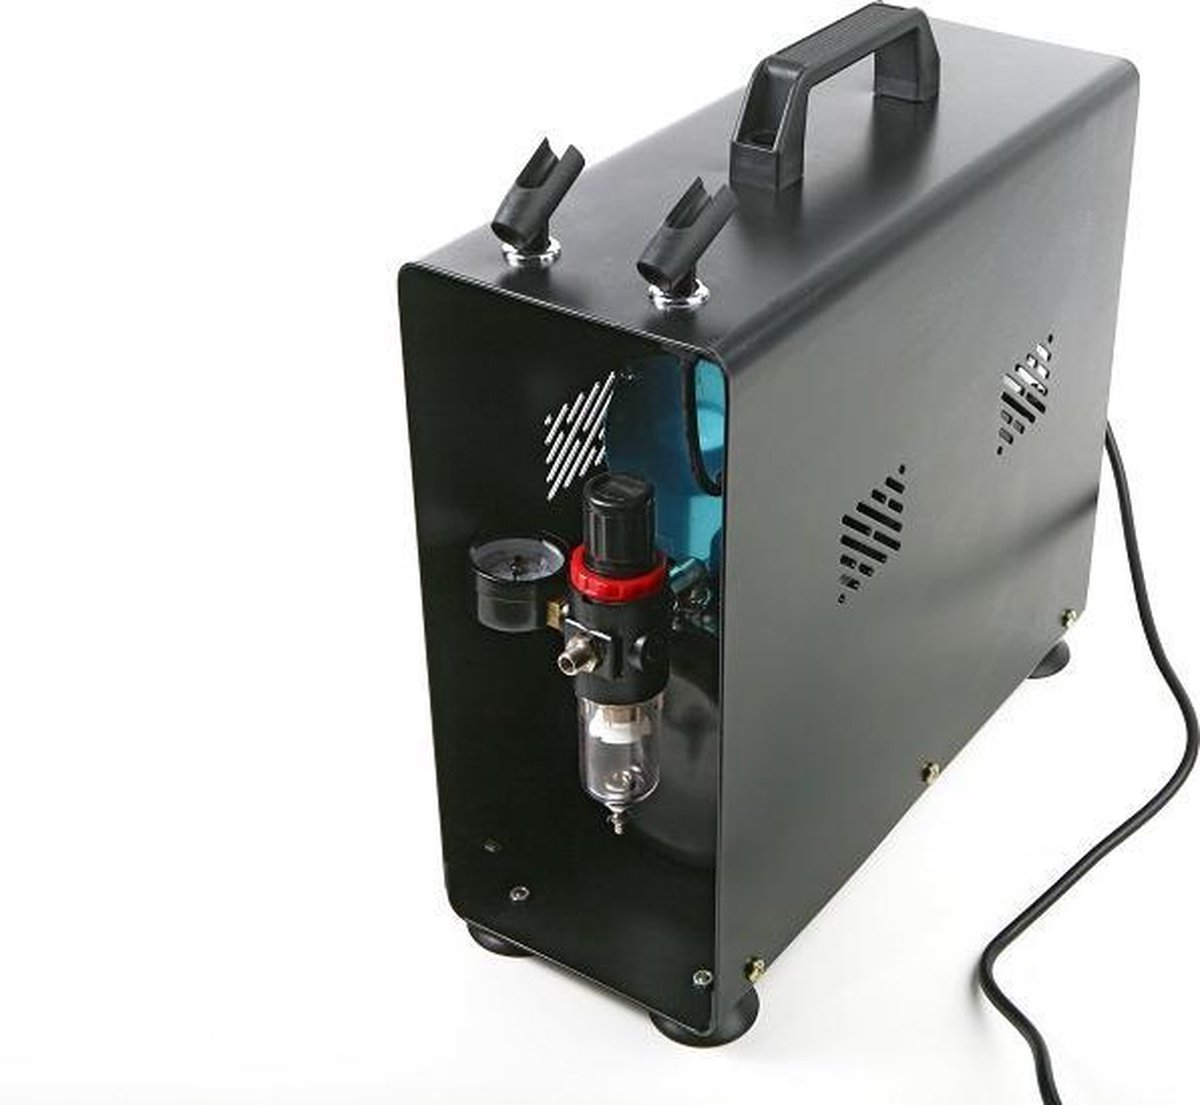 Airbrush Compressor met Tank (1 Cilinder) AS 189 A